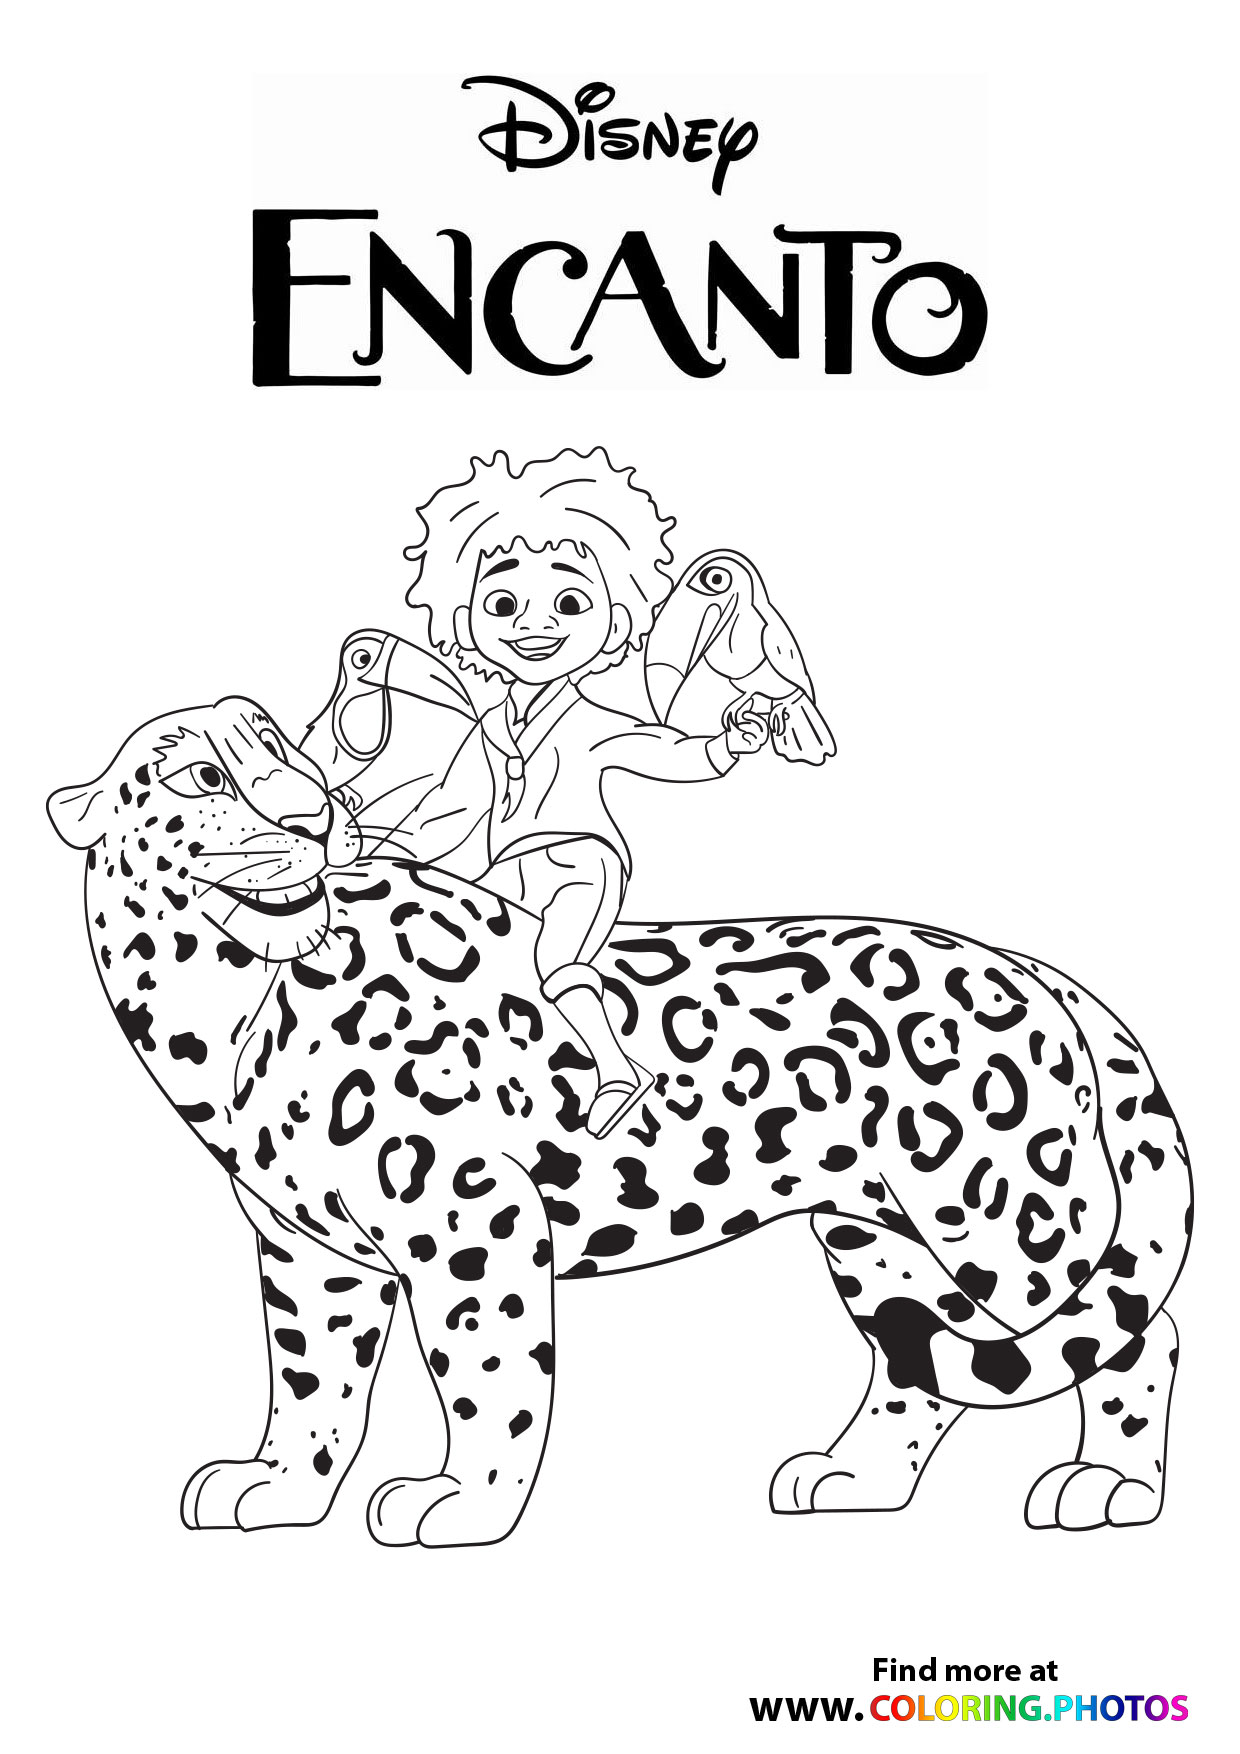 Disney Encanto Coloring Pages for kids   Free coloring ...